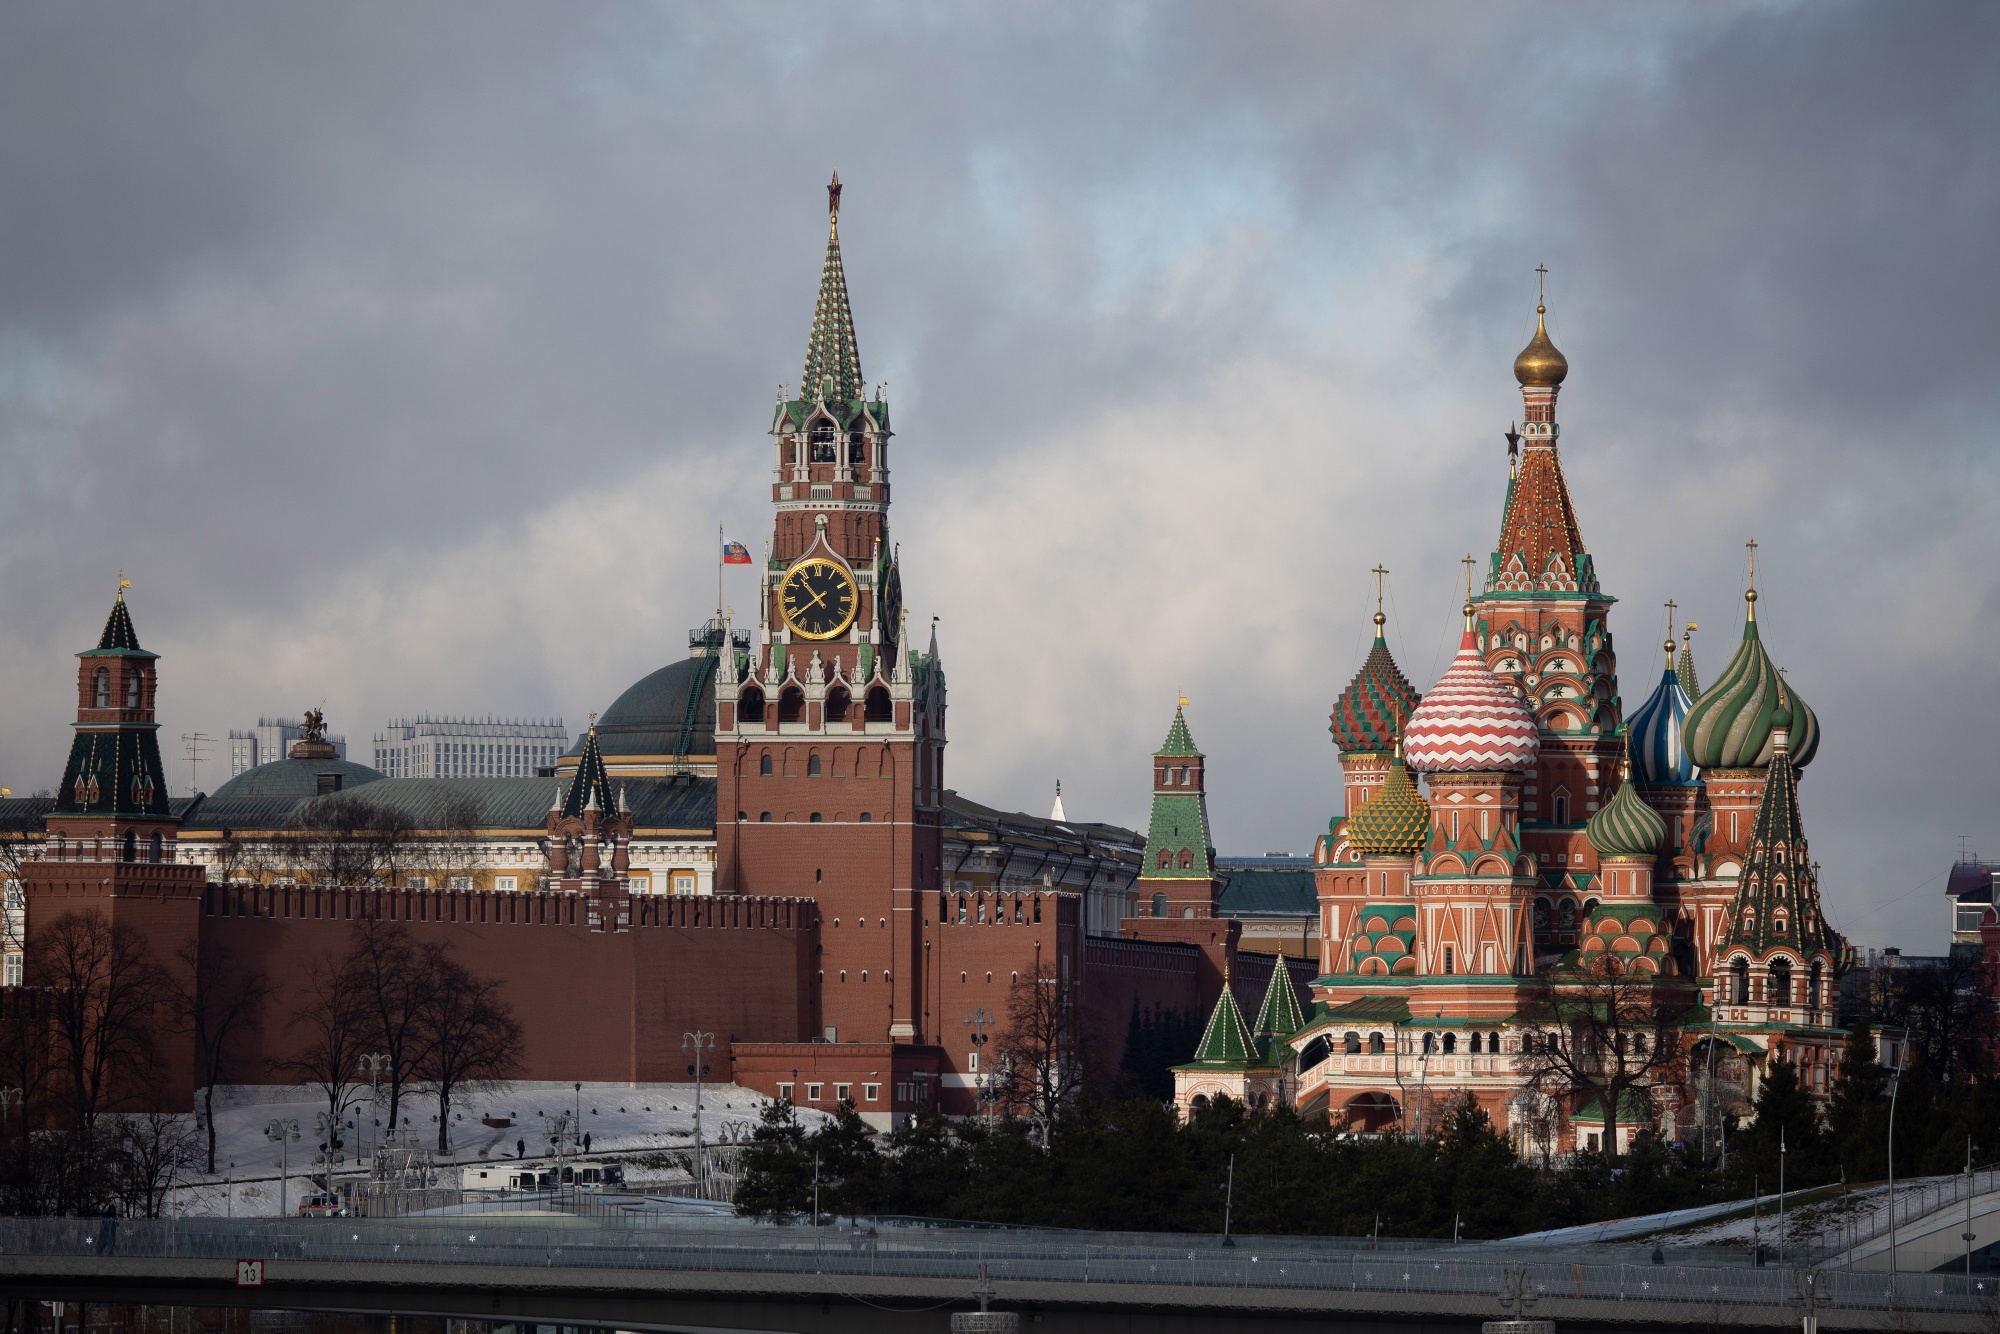 The Spasskaya tower of the Kremlin, center, and Saint Basil's Cathedral, right, in Moscow.